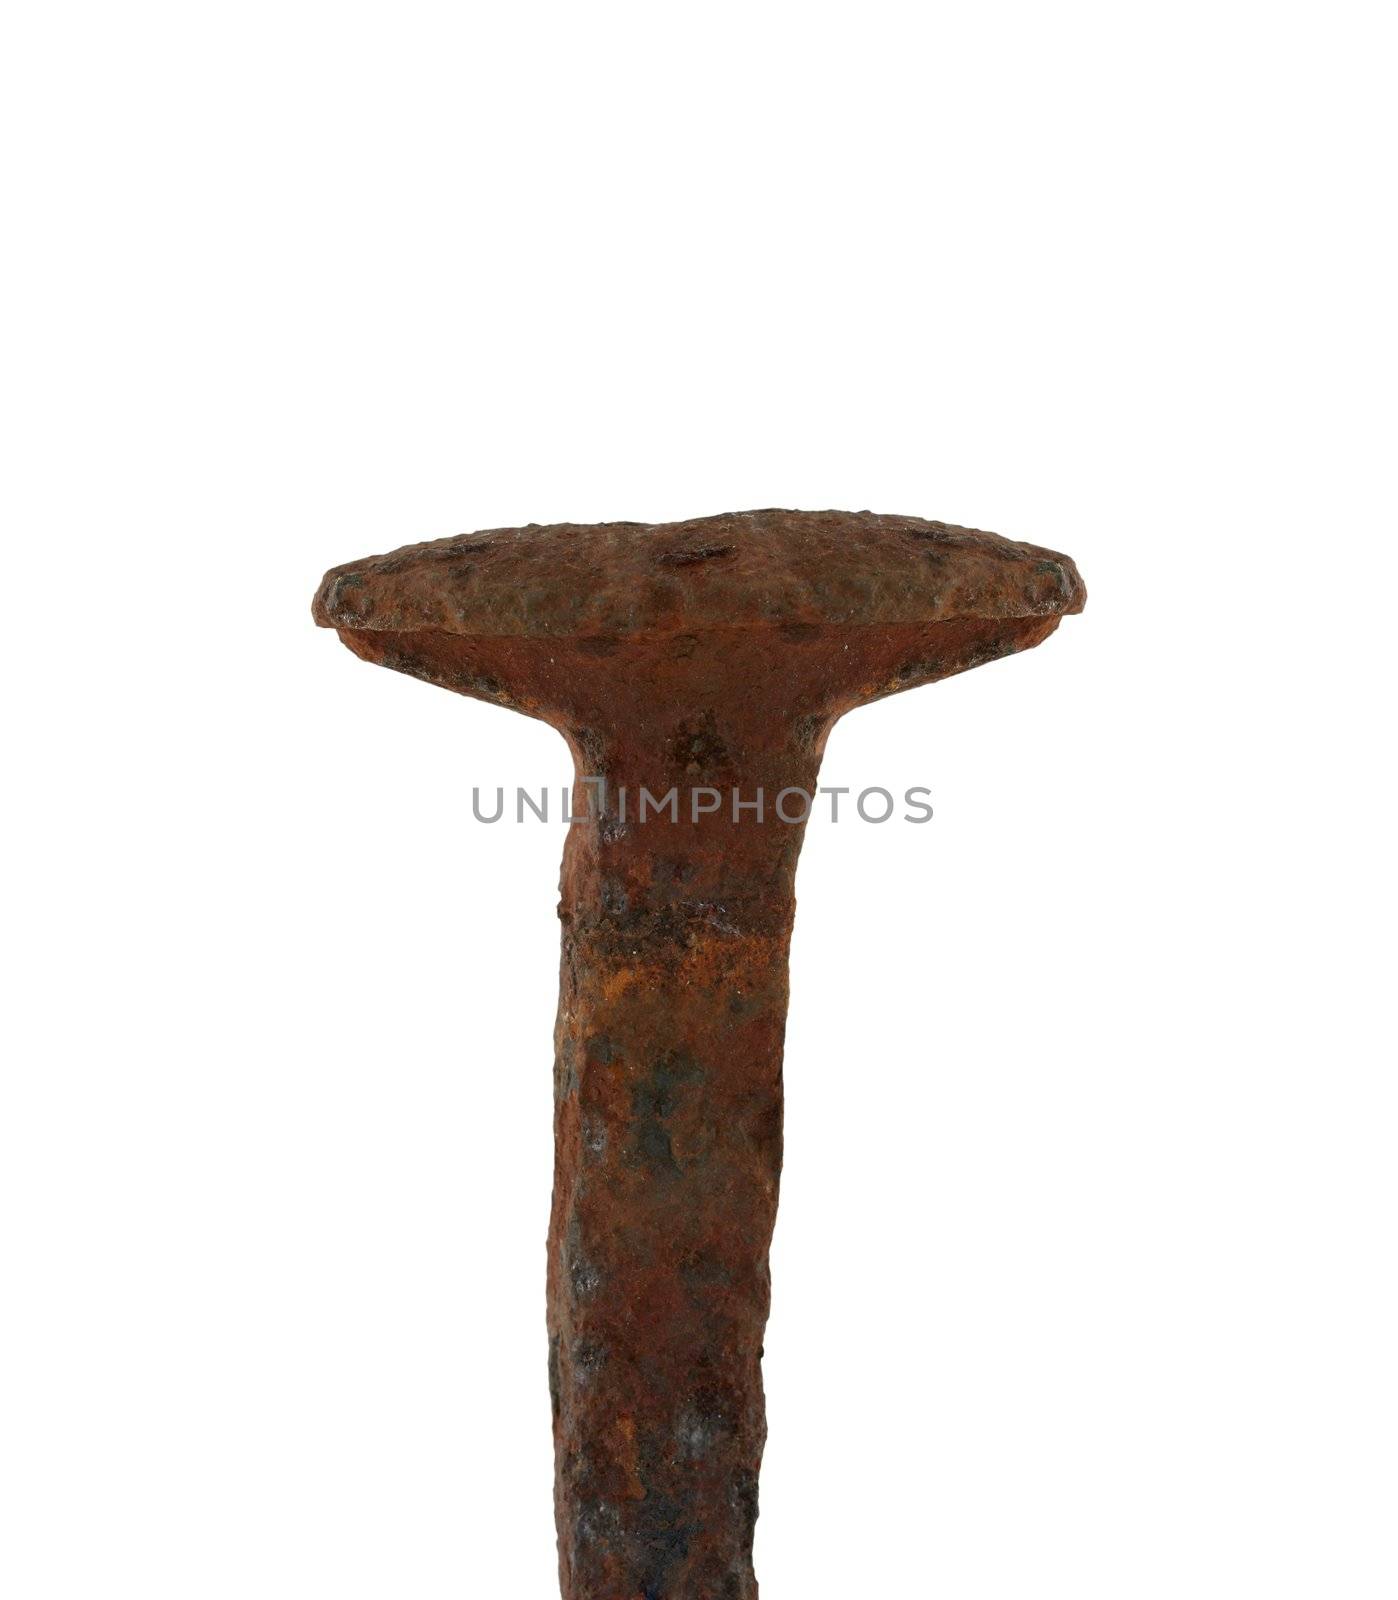 A Isolated rusty railroad spike on white